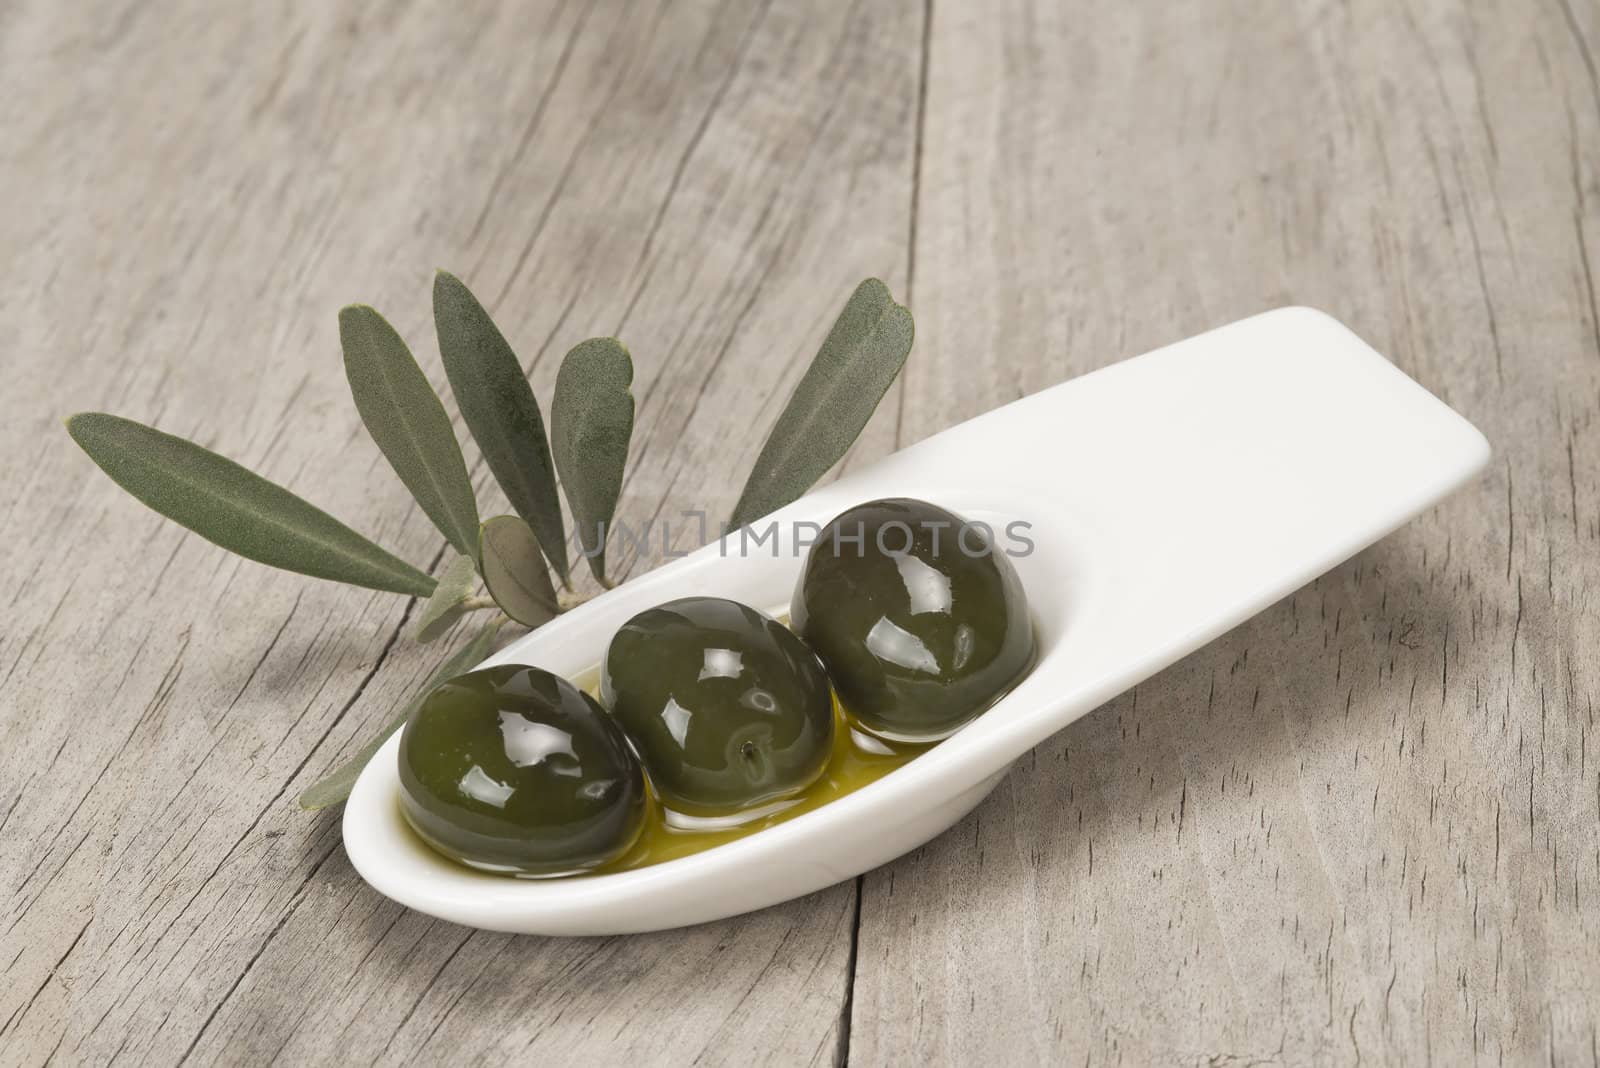 A china spoon with olives and leaves on a wooden surface
